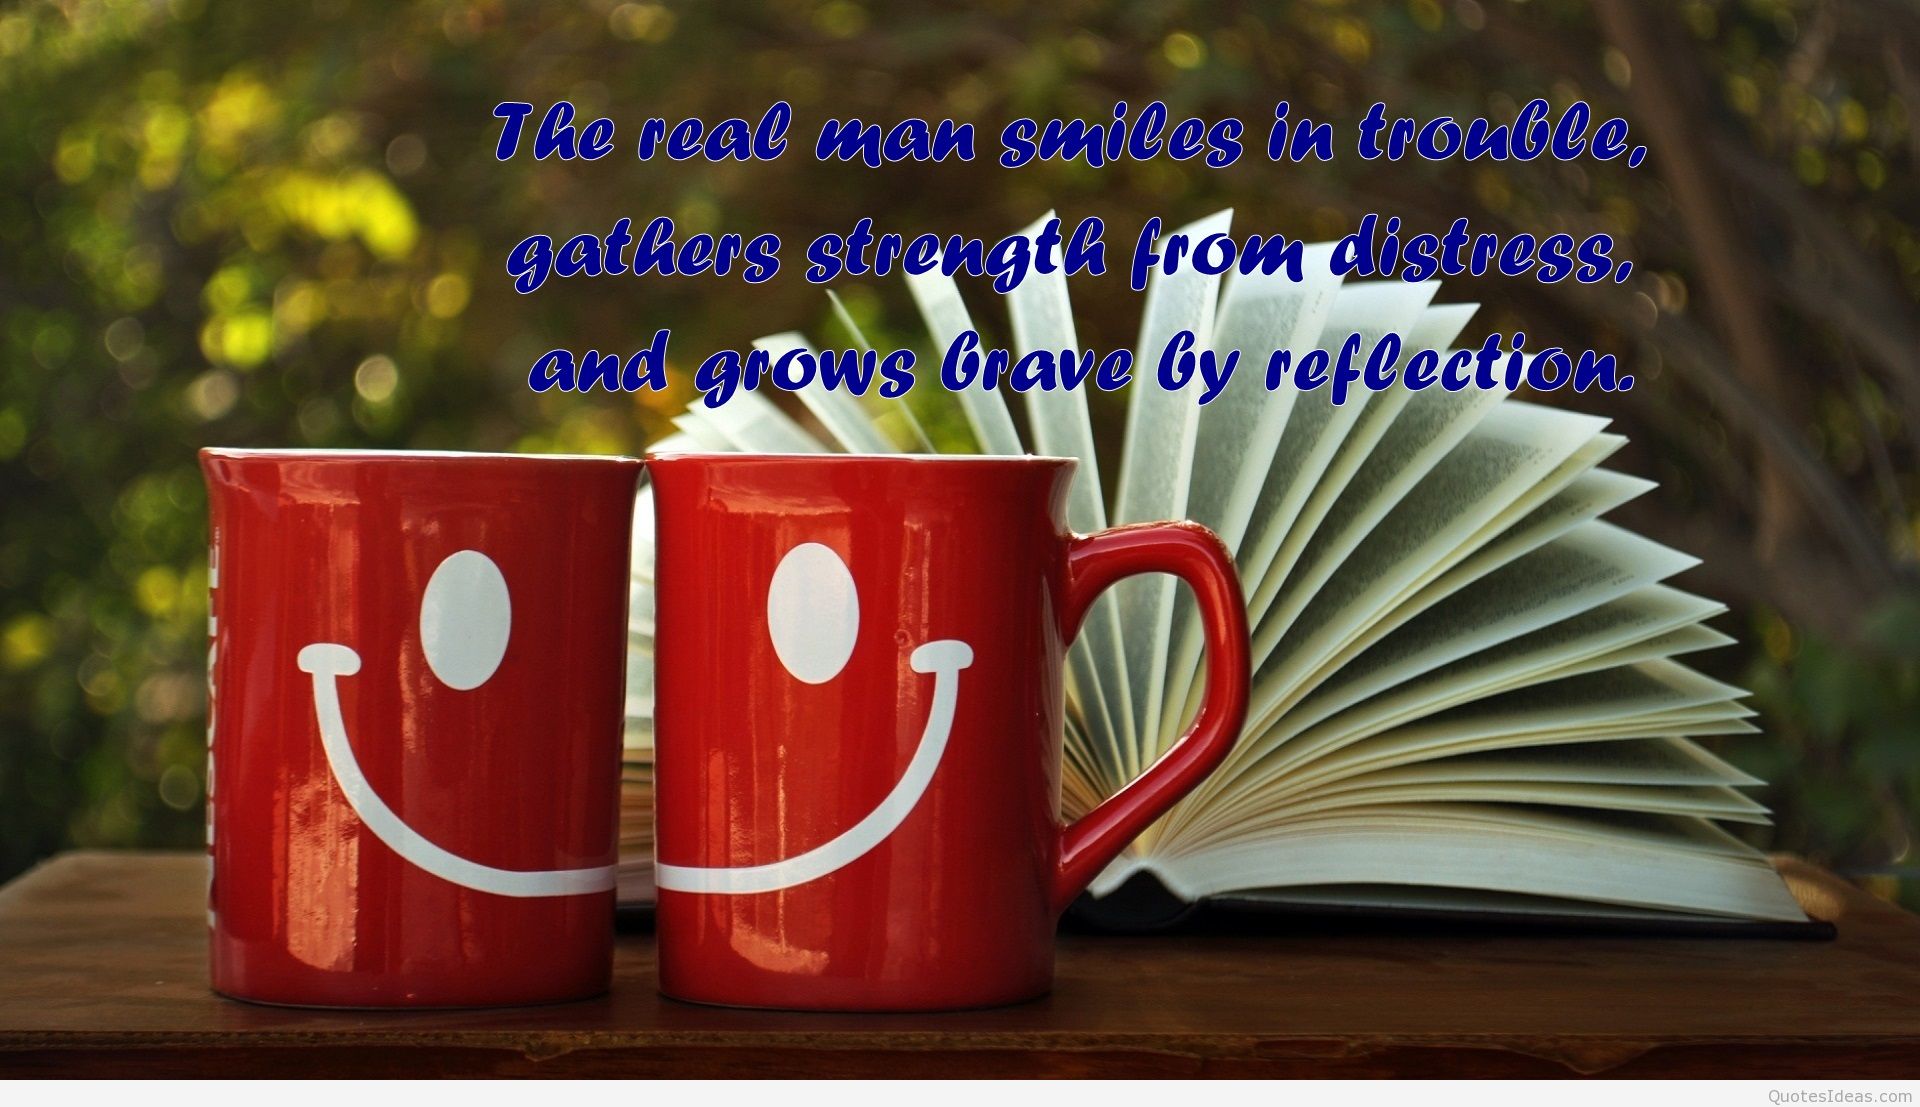 Smile Quotes Wallpaper And Image Be Happy